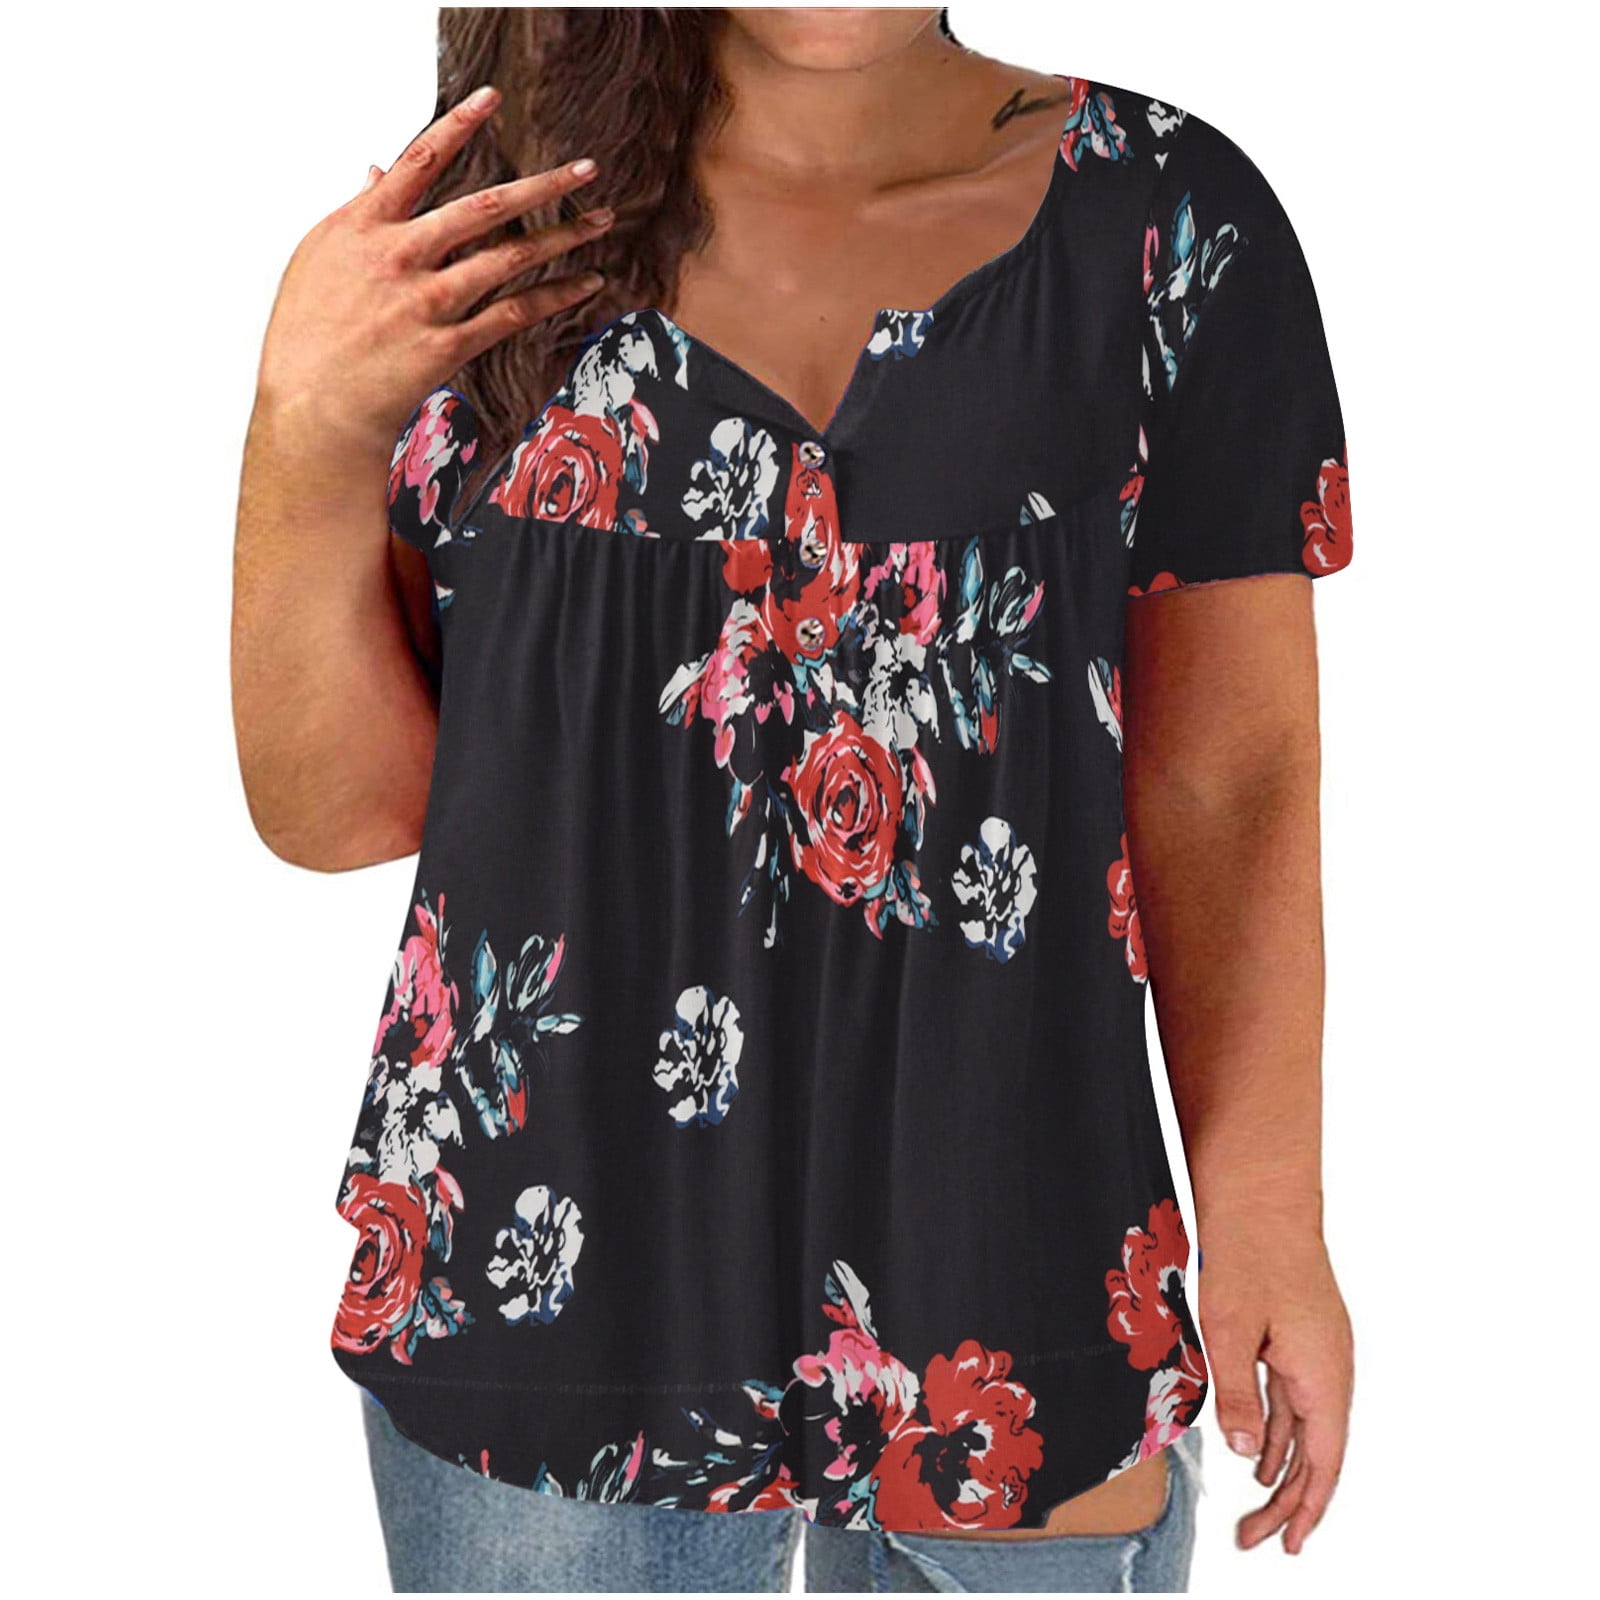 Womens Tops Clearance Under $5 Women Plus Size V-Neck Flowers Print ...